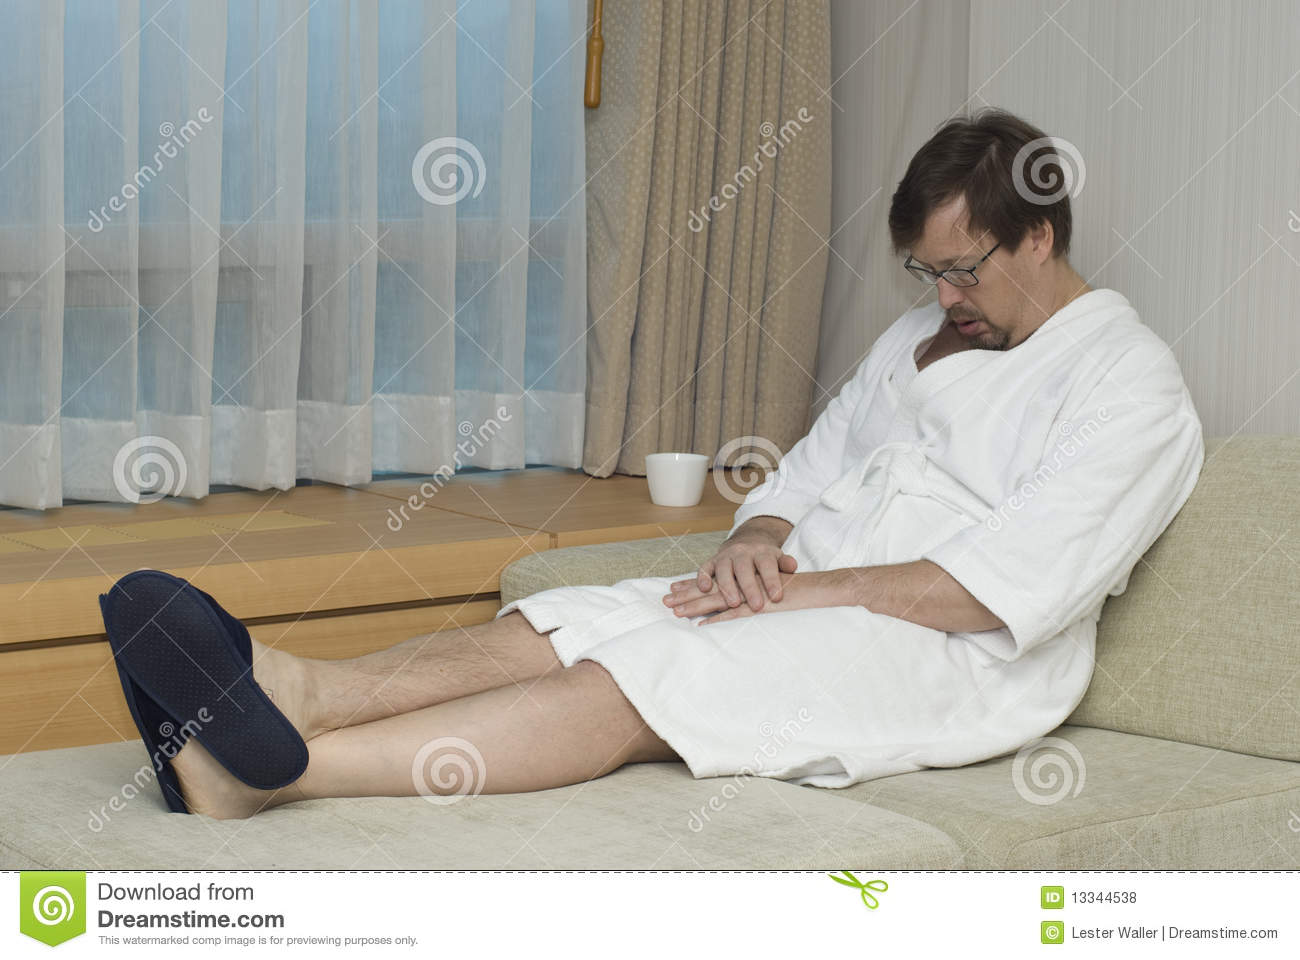 Man Wearing White Robe Slippers And Glasses Has Fallen Asleep While